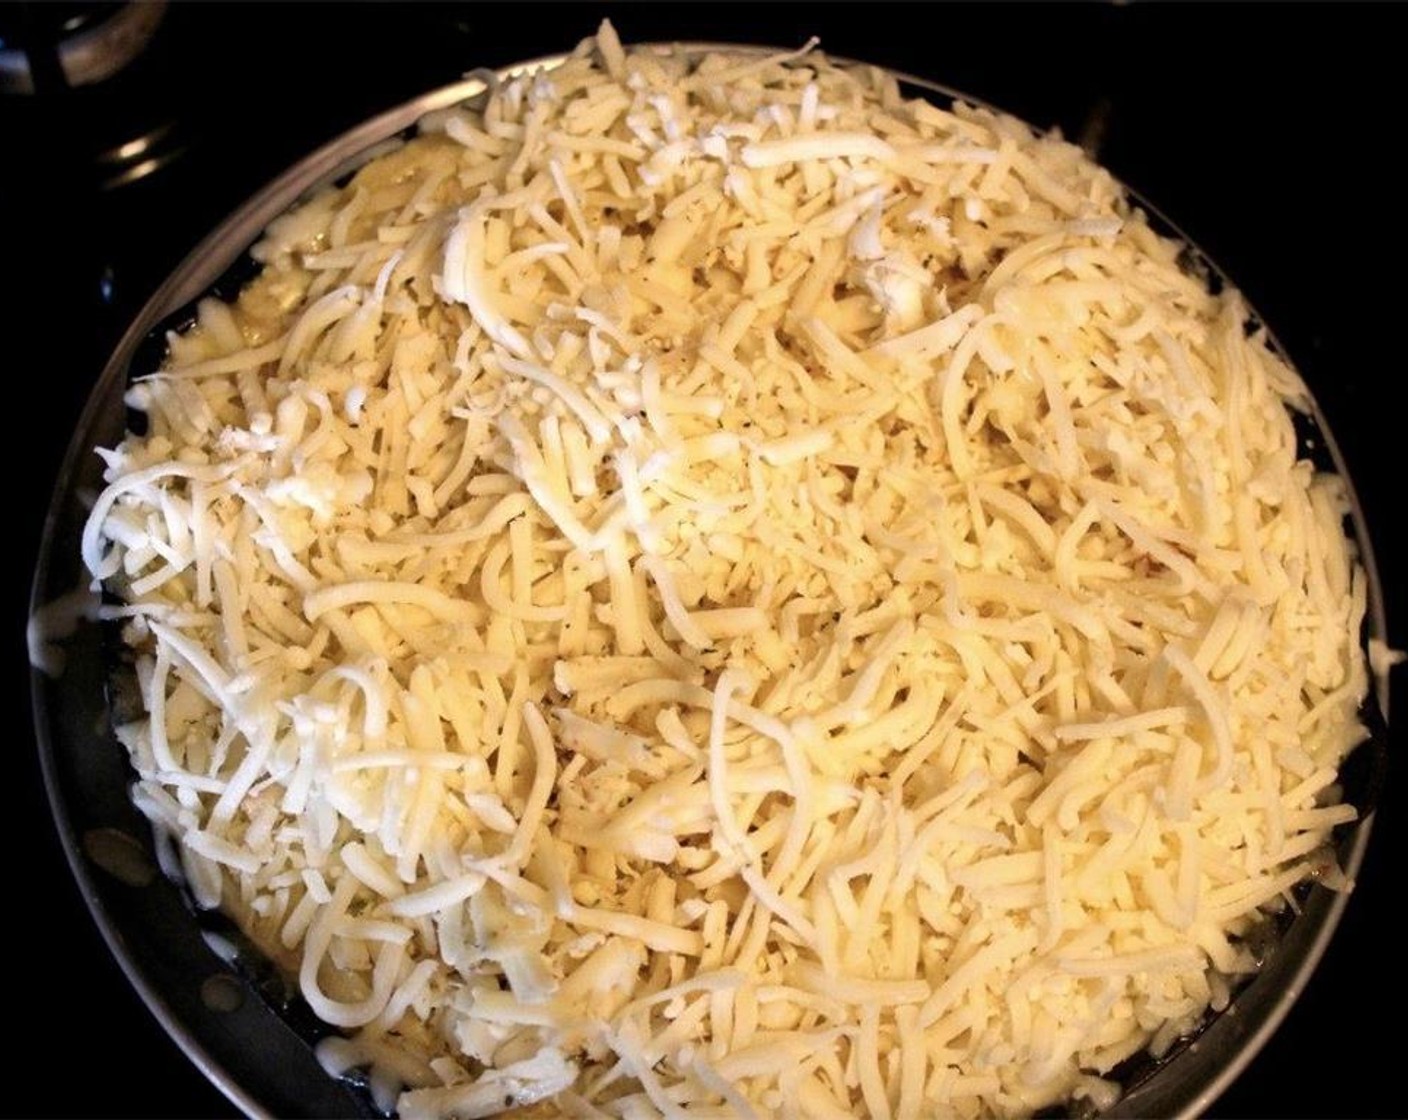 step 6 Place skillet in the oven and bake for approximately 30 minutes, until the cheese is golden.